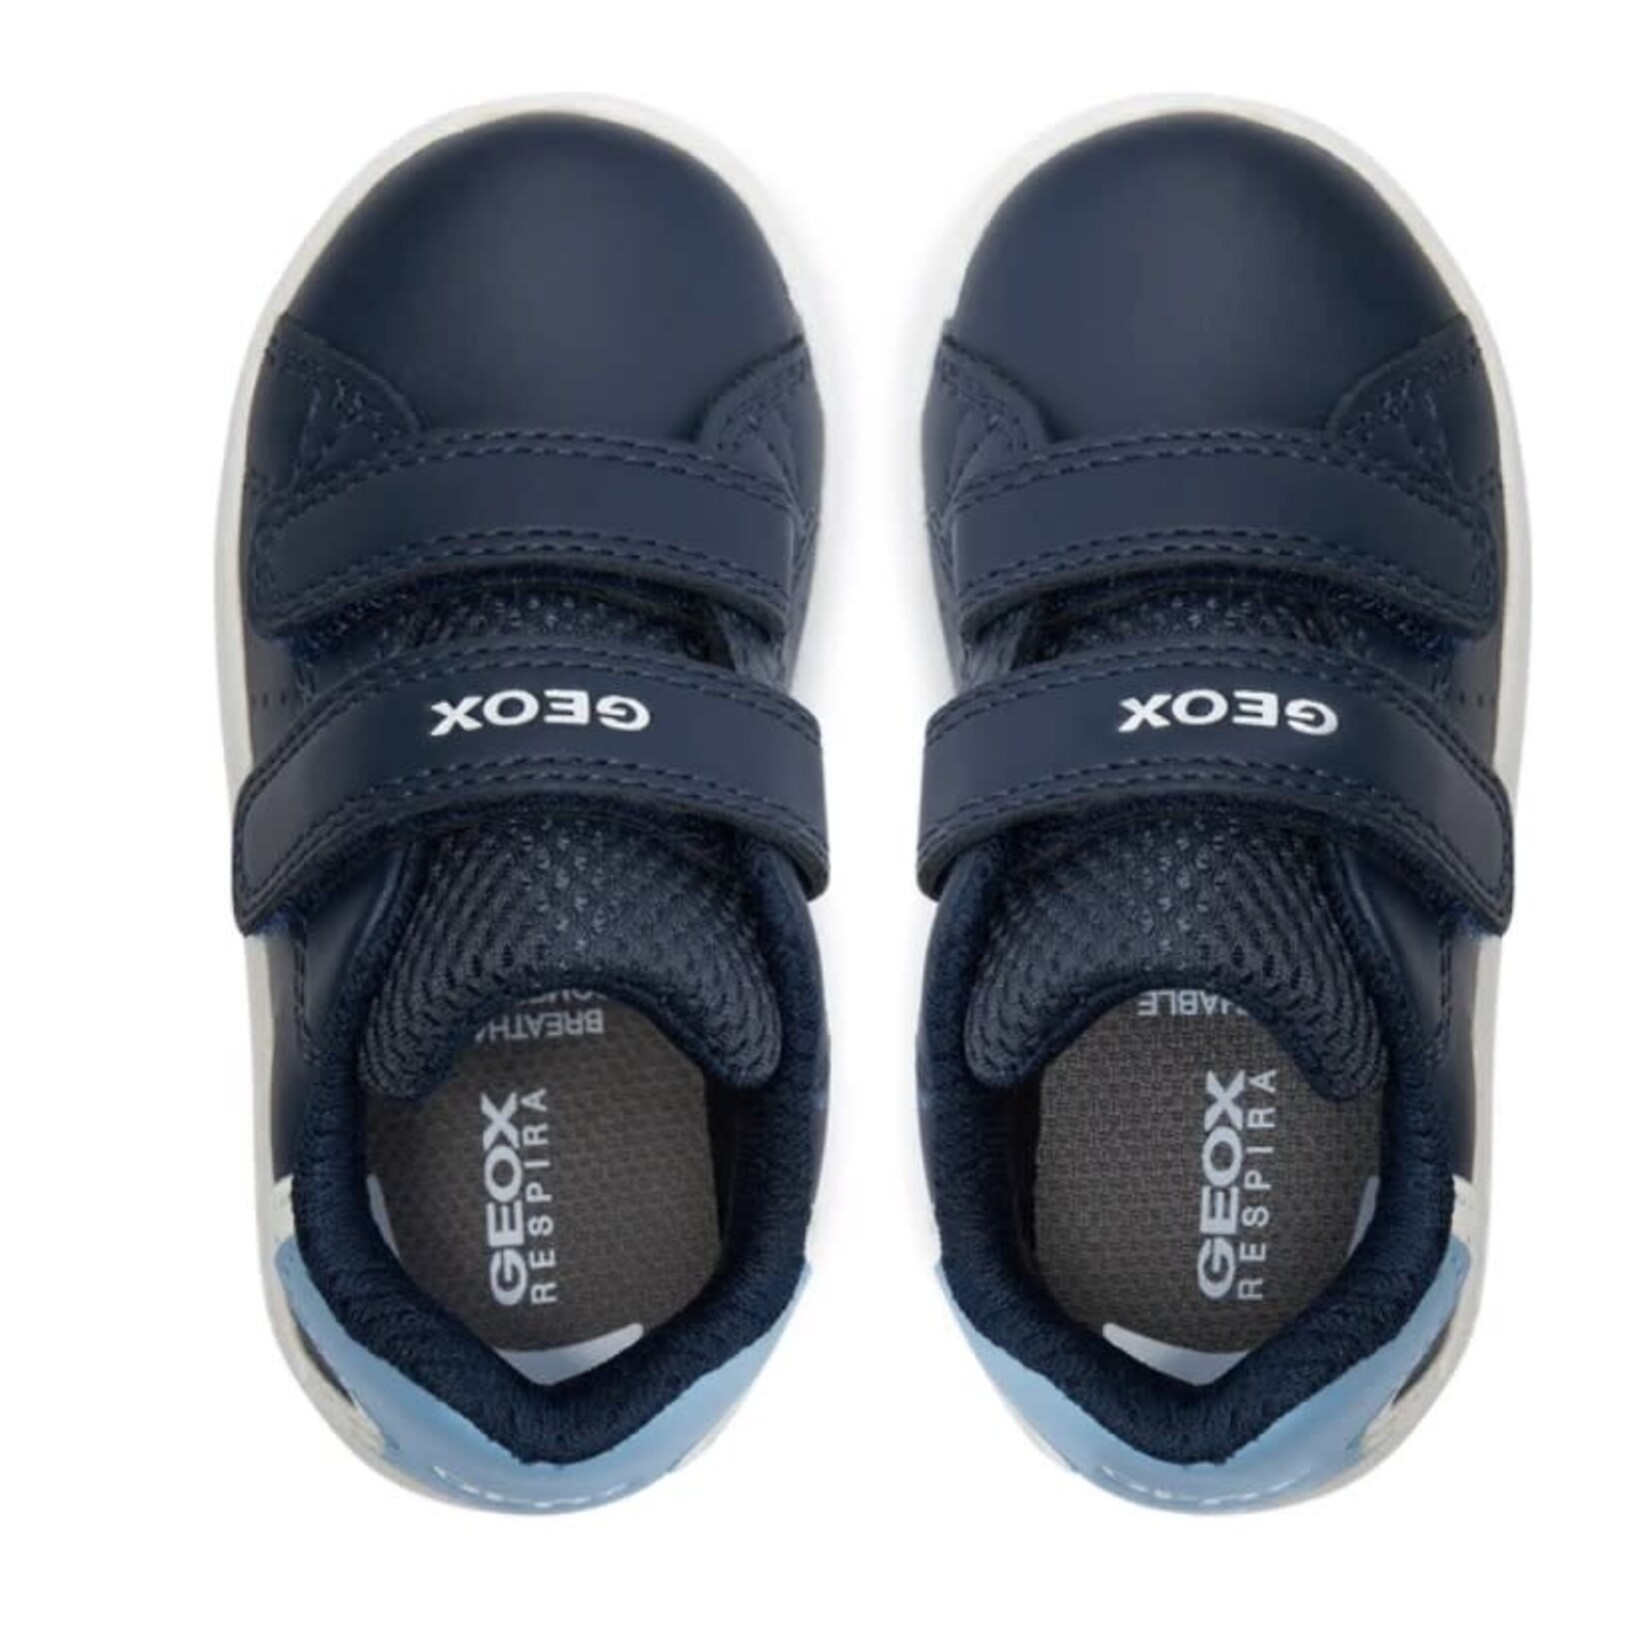 Geox GEOX - Navy synthetic leather shoes 'Eclyper - Navy/Light denim'